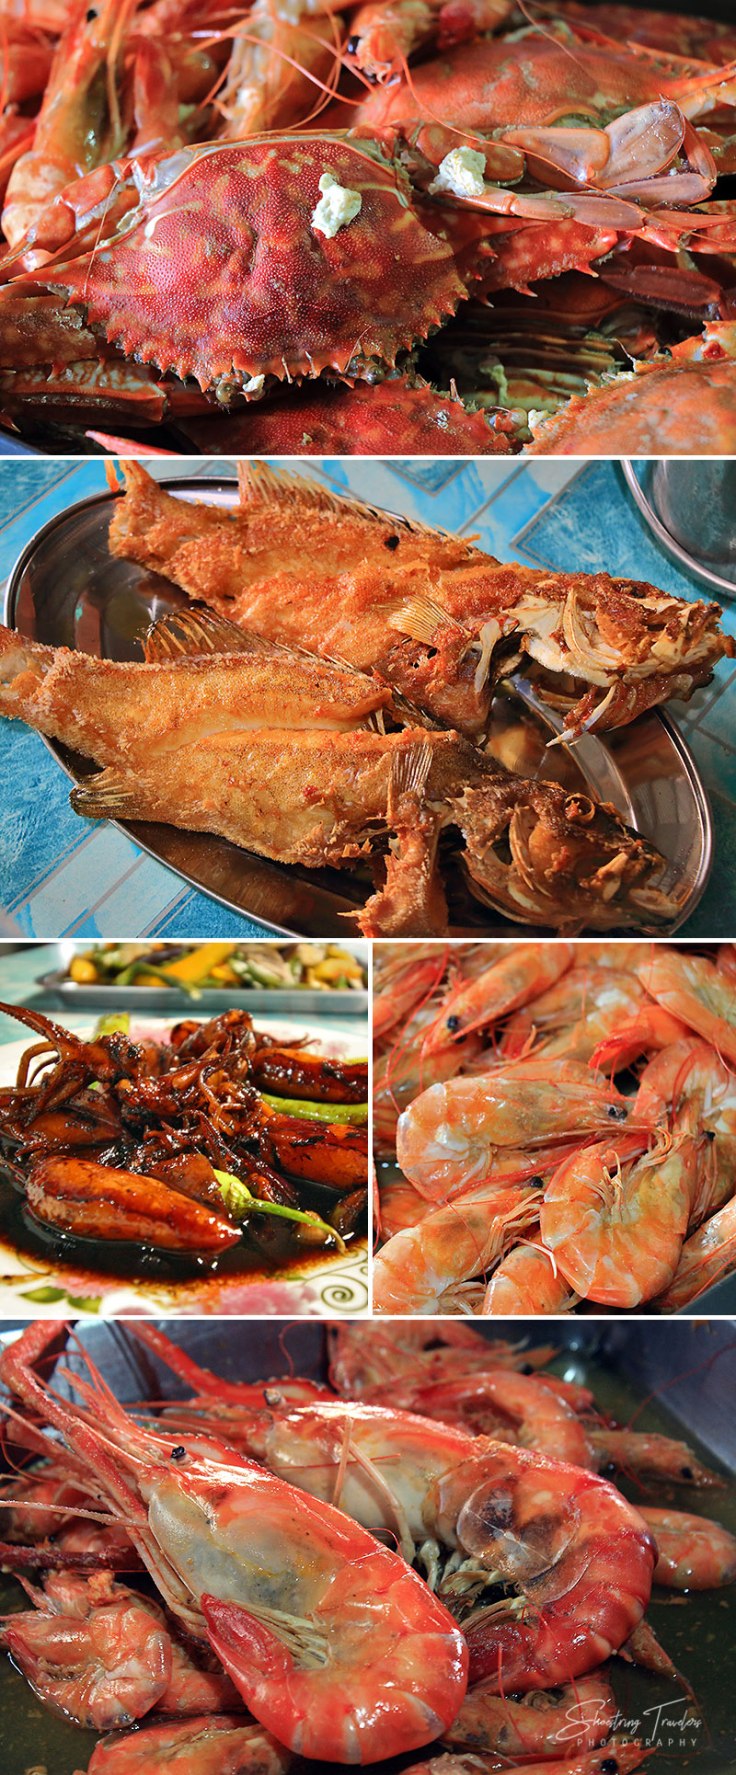 cooked seafood at the Tignoan seafood market